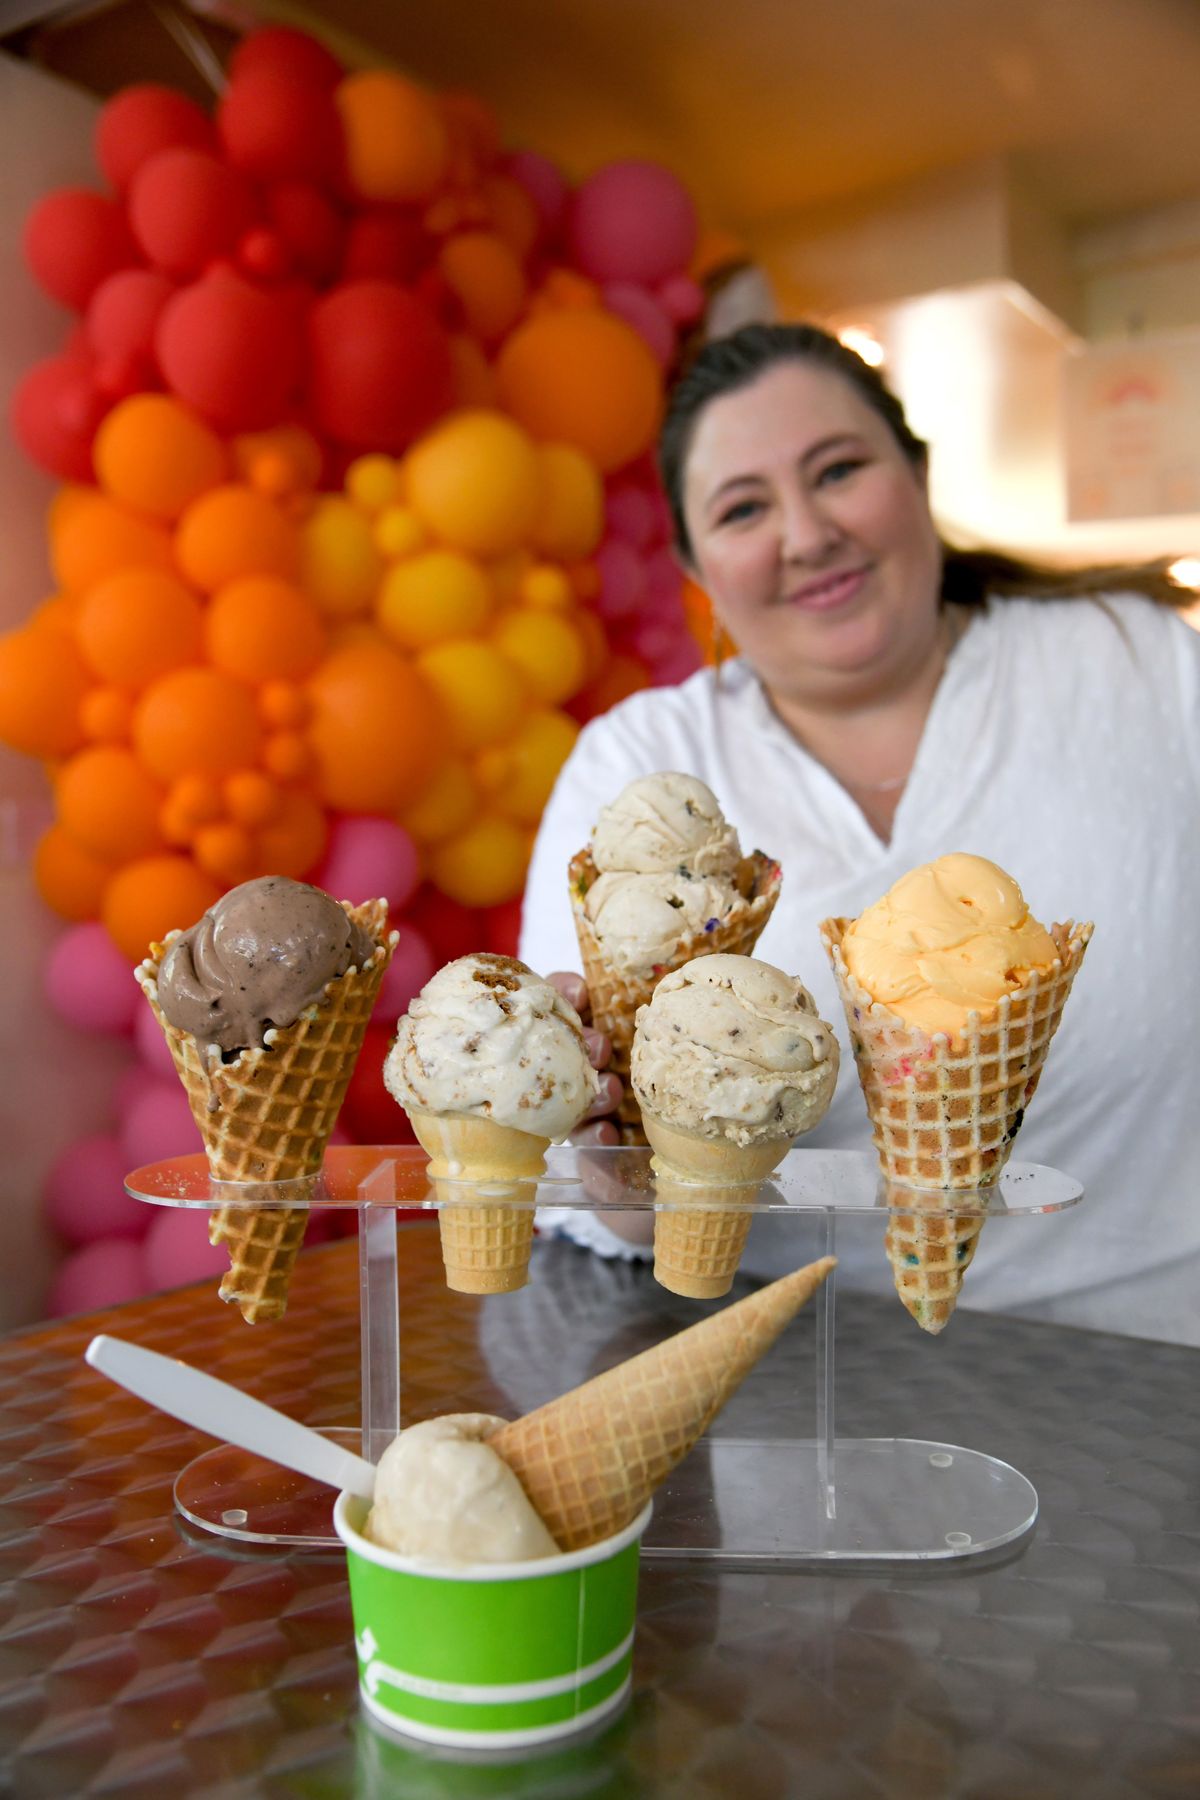 Owner Jennifer Davis shows off the top five ice cream flavors at The Scoop. She has two locations in Spokane, 1001 W. 25th Ave. and 1238 W. Summit Parkway in Kendall Yards. The flavors shown are, in the cup, Salted Caramel; Mud Pie, in the cones from left, Giant’s Milk and Cookies, Banoffee Pie, and Orange Dreamsicle; and Cookie Butter and Cookie Dough, held by Davis.  (Jesse Tinsley/The Spokesman-Review)